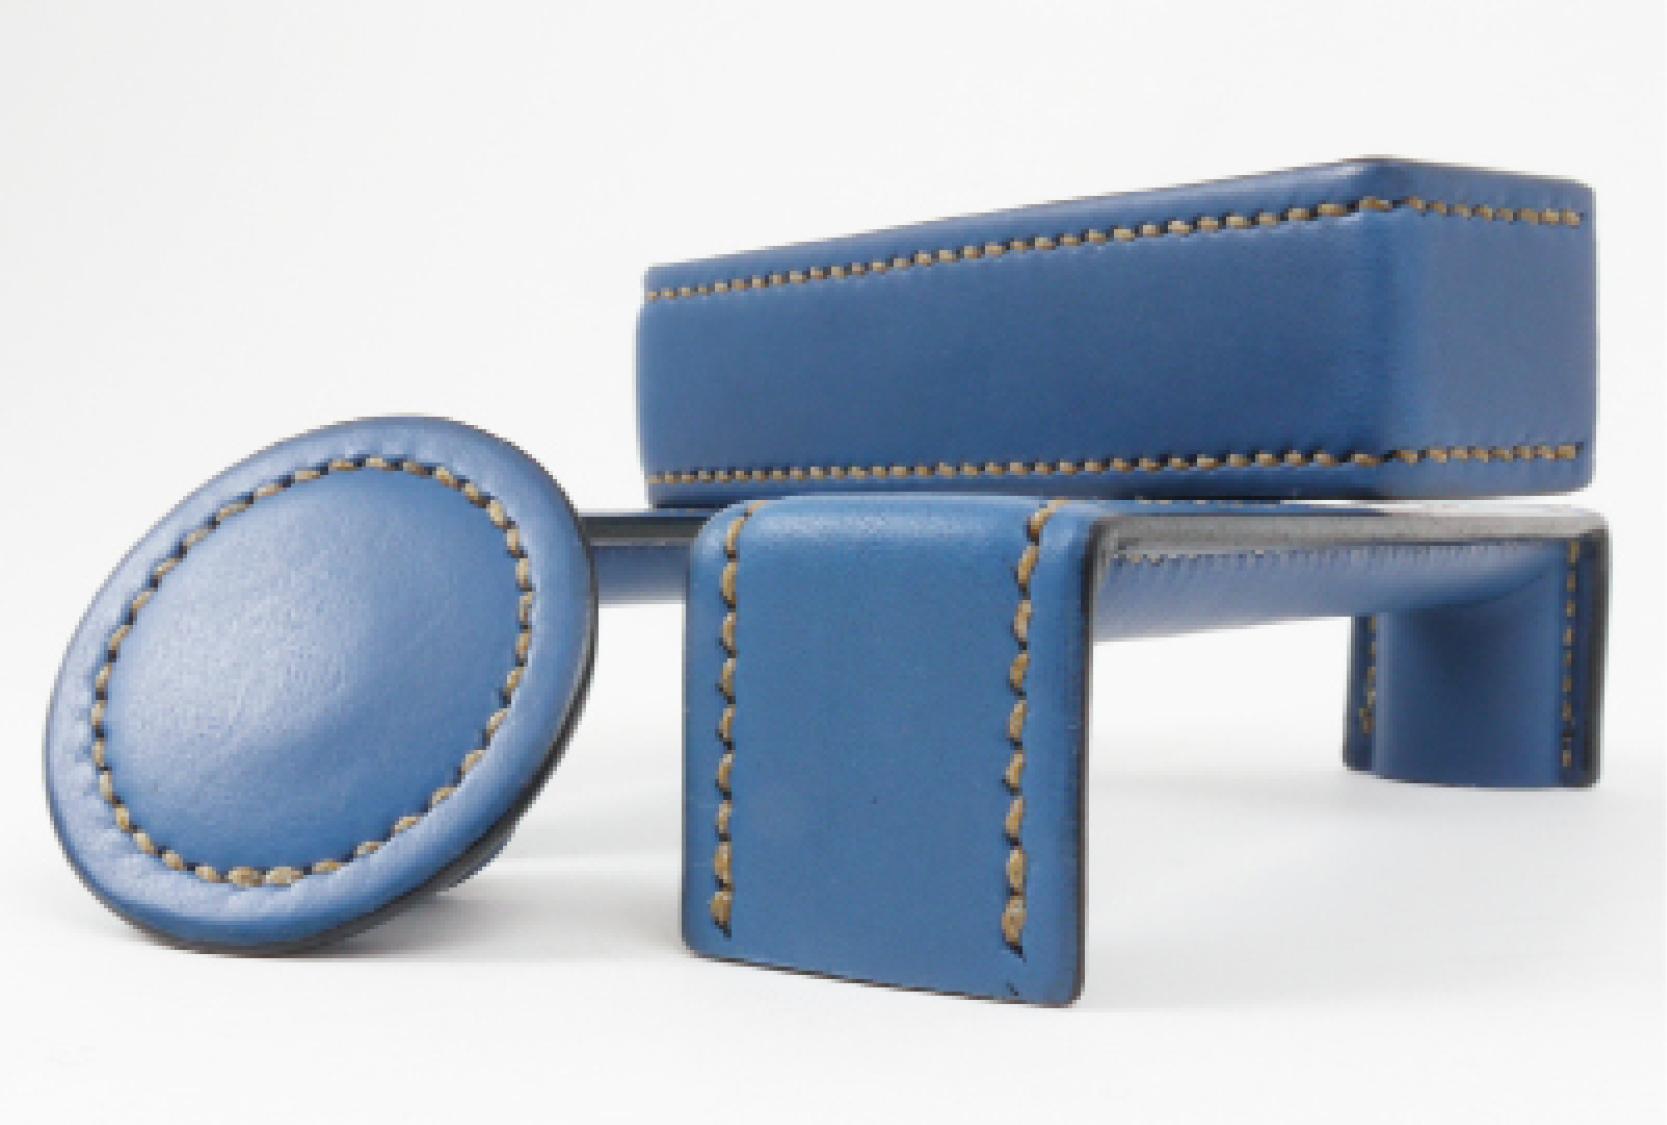 Image displays Turnstyle Designs Savile range. The range includes the bench and button designs Both designs are finished in a custom aqua blue leather, with a natural stitch.